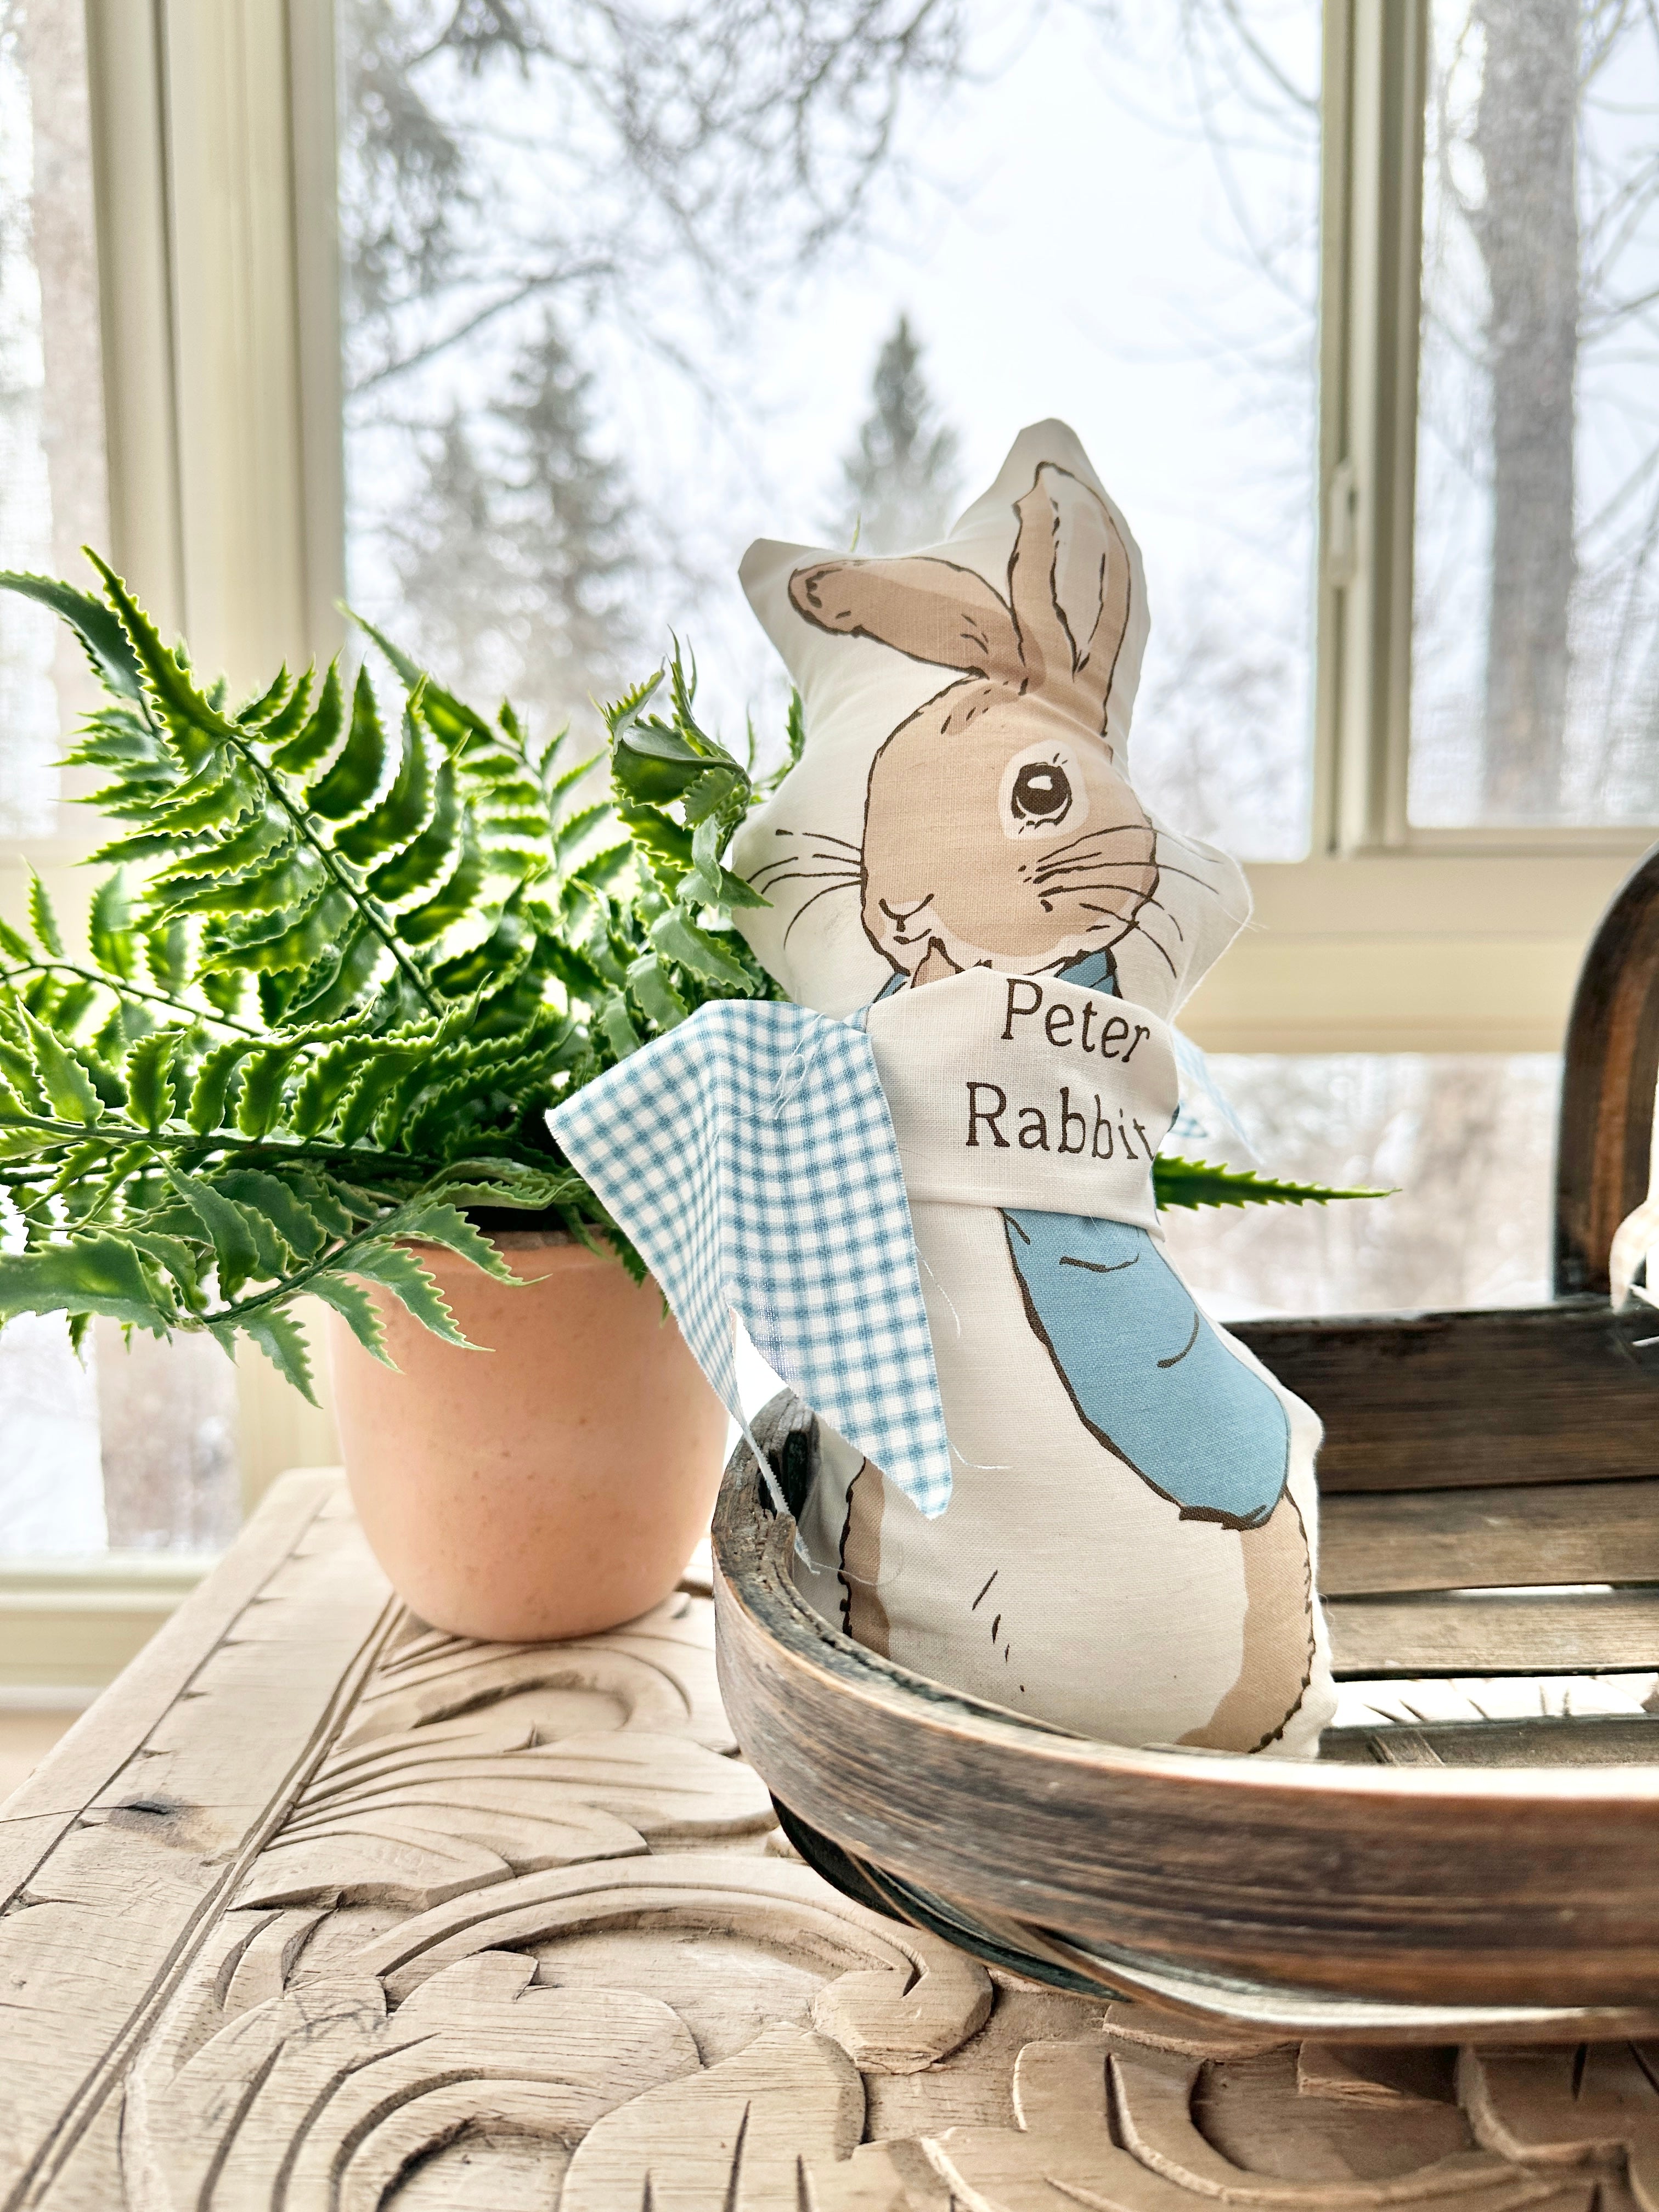 The Blue Version with Peter Rabbit & Cotton-Tail